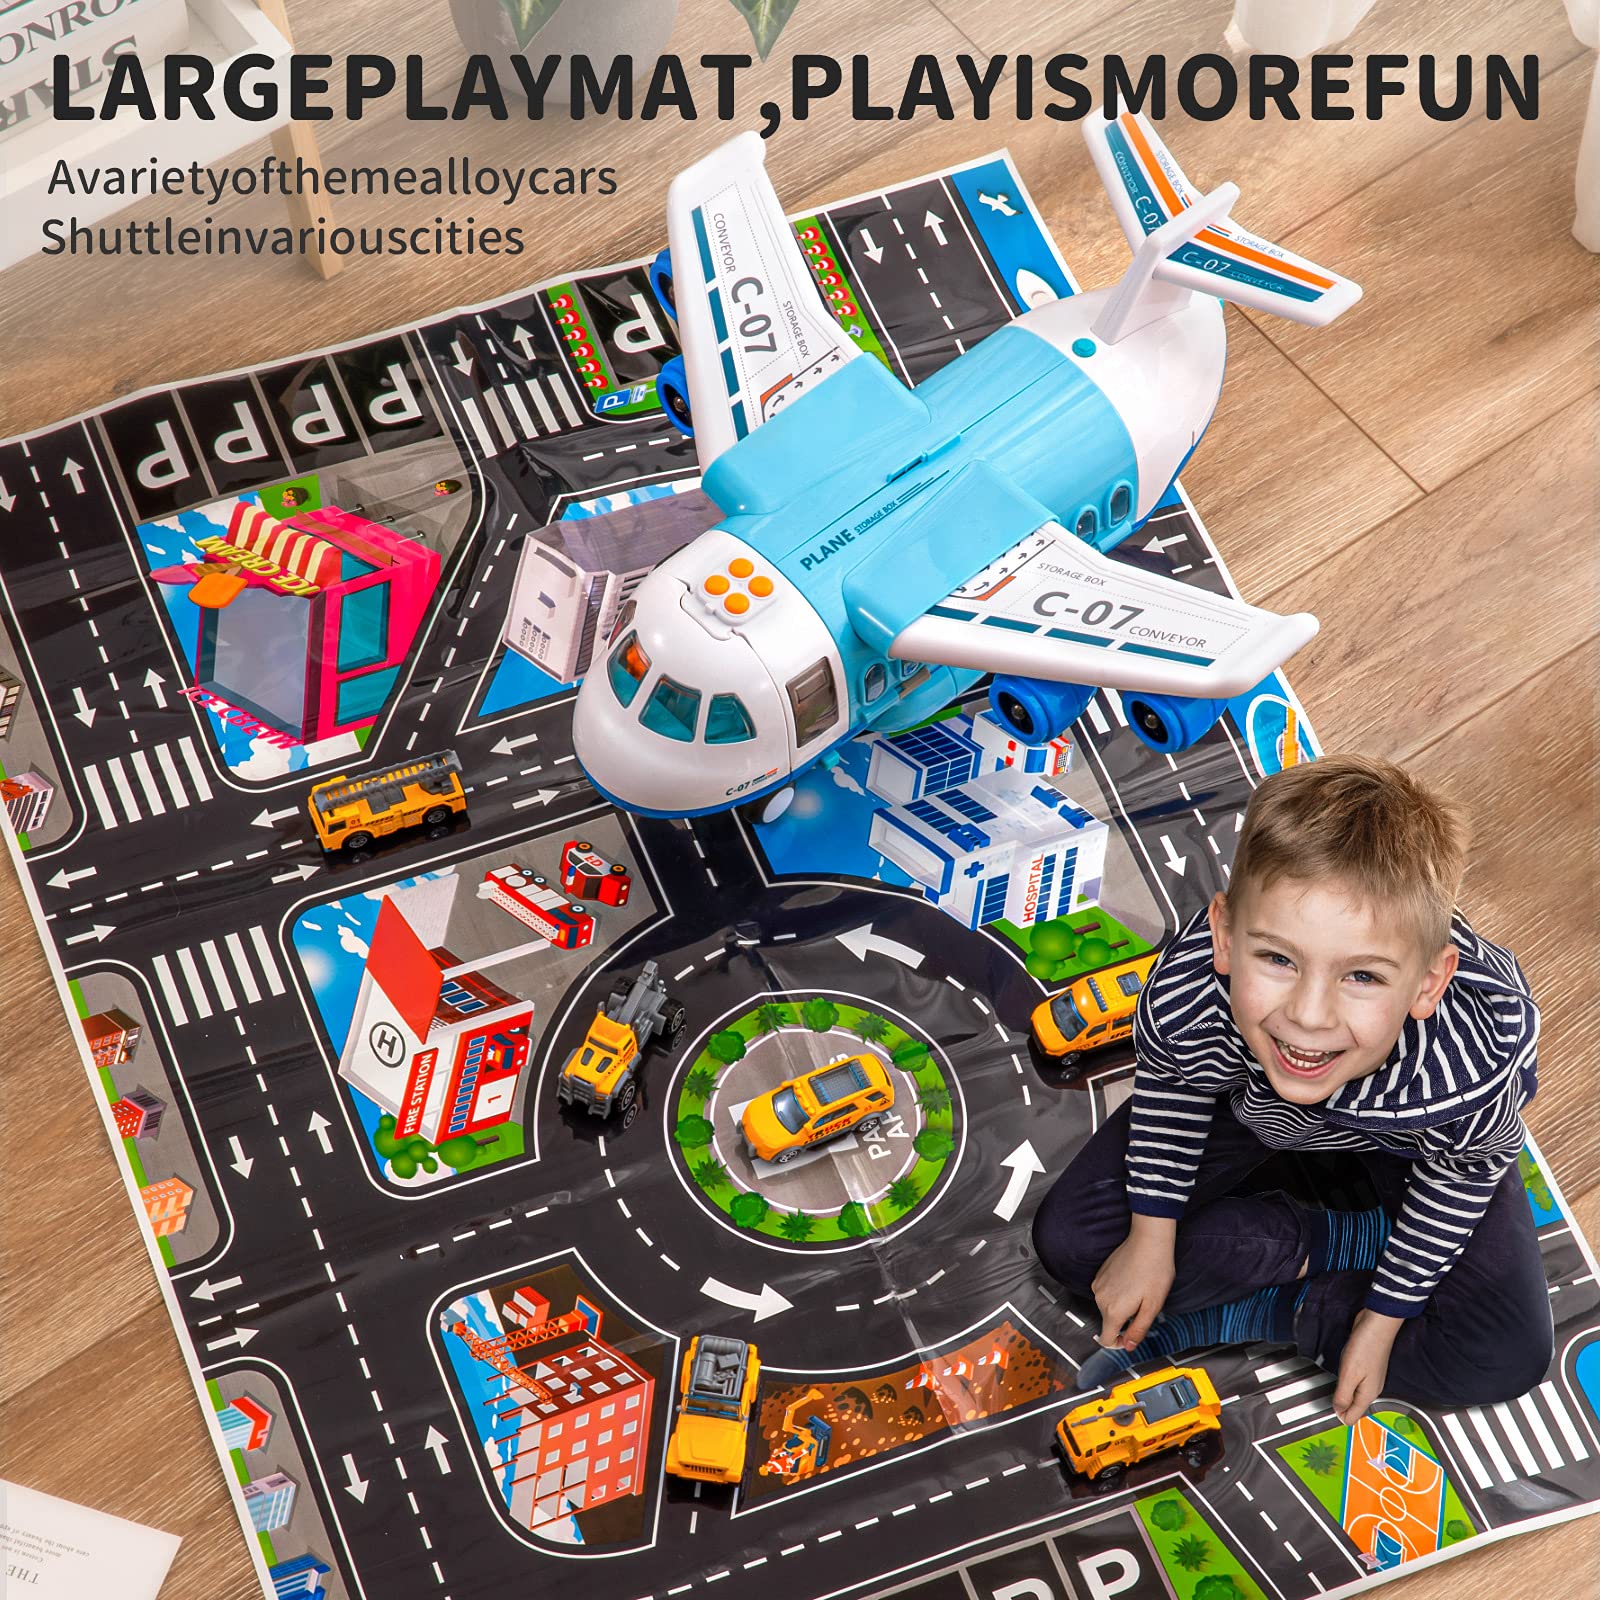 TEMI Mist Spay Storage Transport Plane Cargo with 6 Free Wheel Diecast Construction Vehicles and Playmat, Kids Toy Jet Aircraft with Lights & Sounds for 3 4 5 6 Years Old Boys and Girls